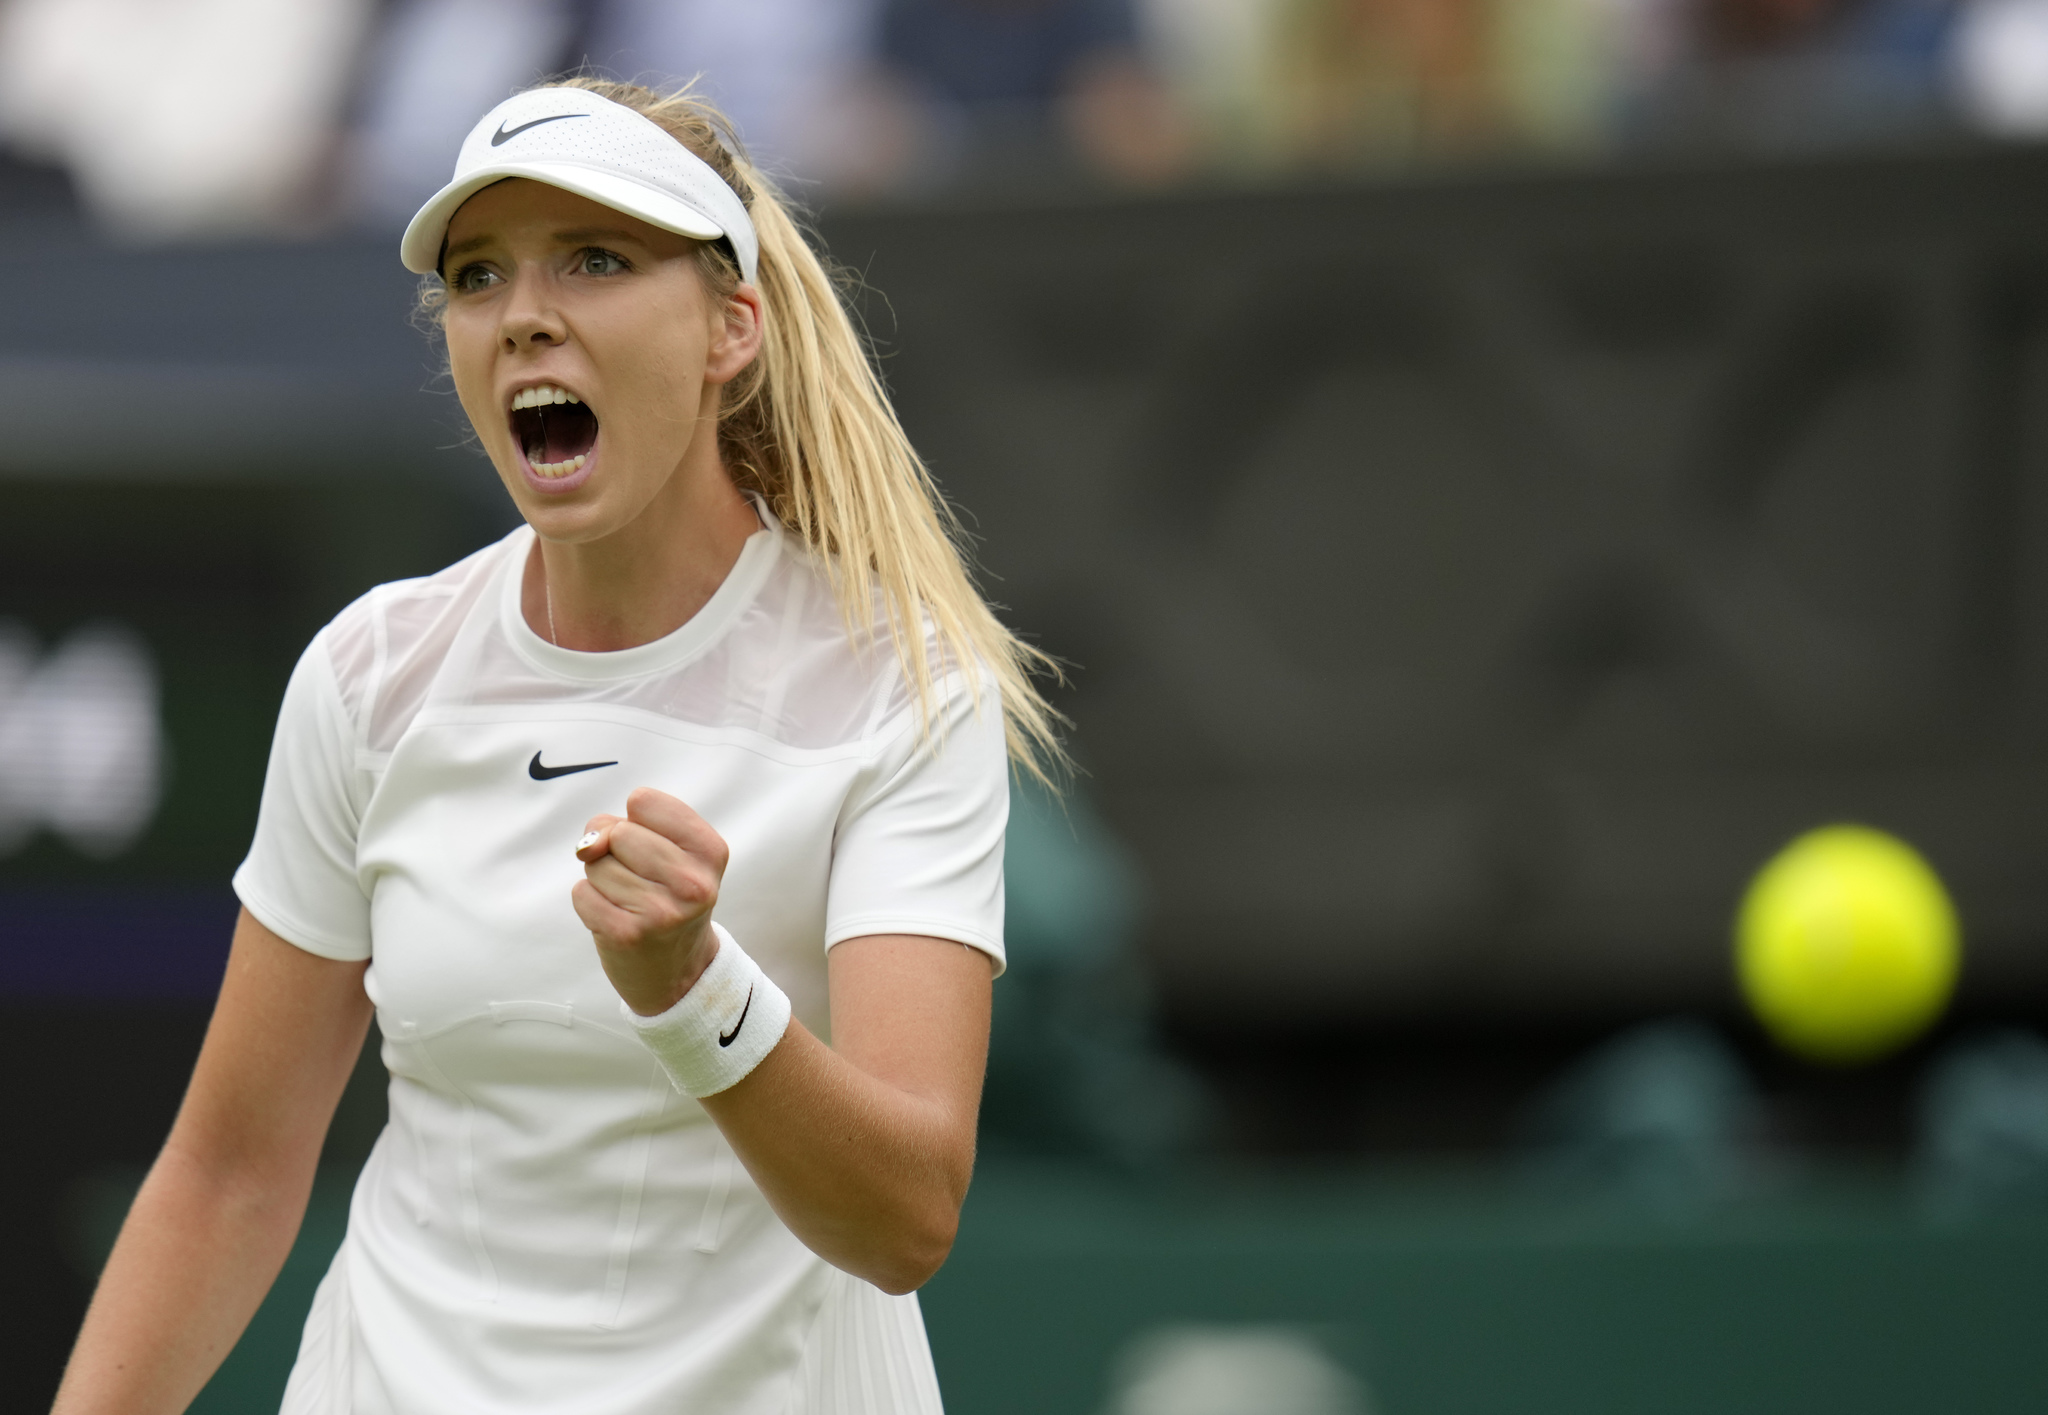 Britain's Katie  lt;HIT gt;Boulter lt;/HIT gt; celebrates after winning a point against Karolina Pliskova of the Czech Republic in a second round women's singles match on day four of the Wimbledon tennis championships in London, Thursday, June 30, 2022. (AP Photo/Kirsty Wigglesworth)